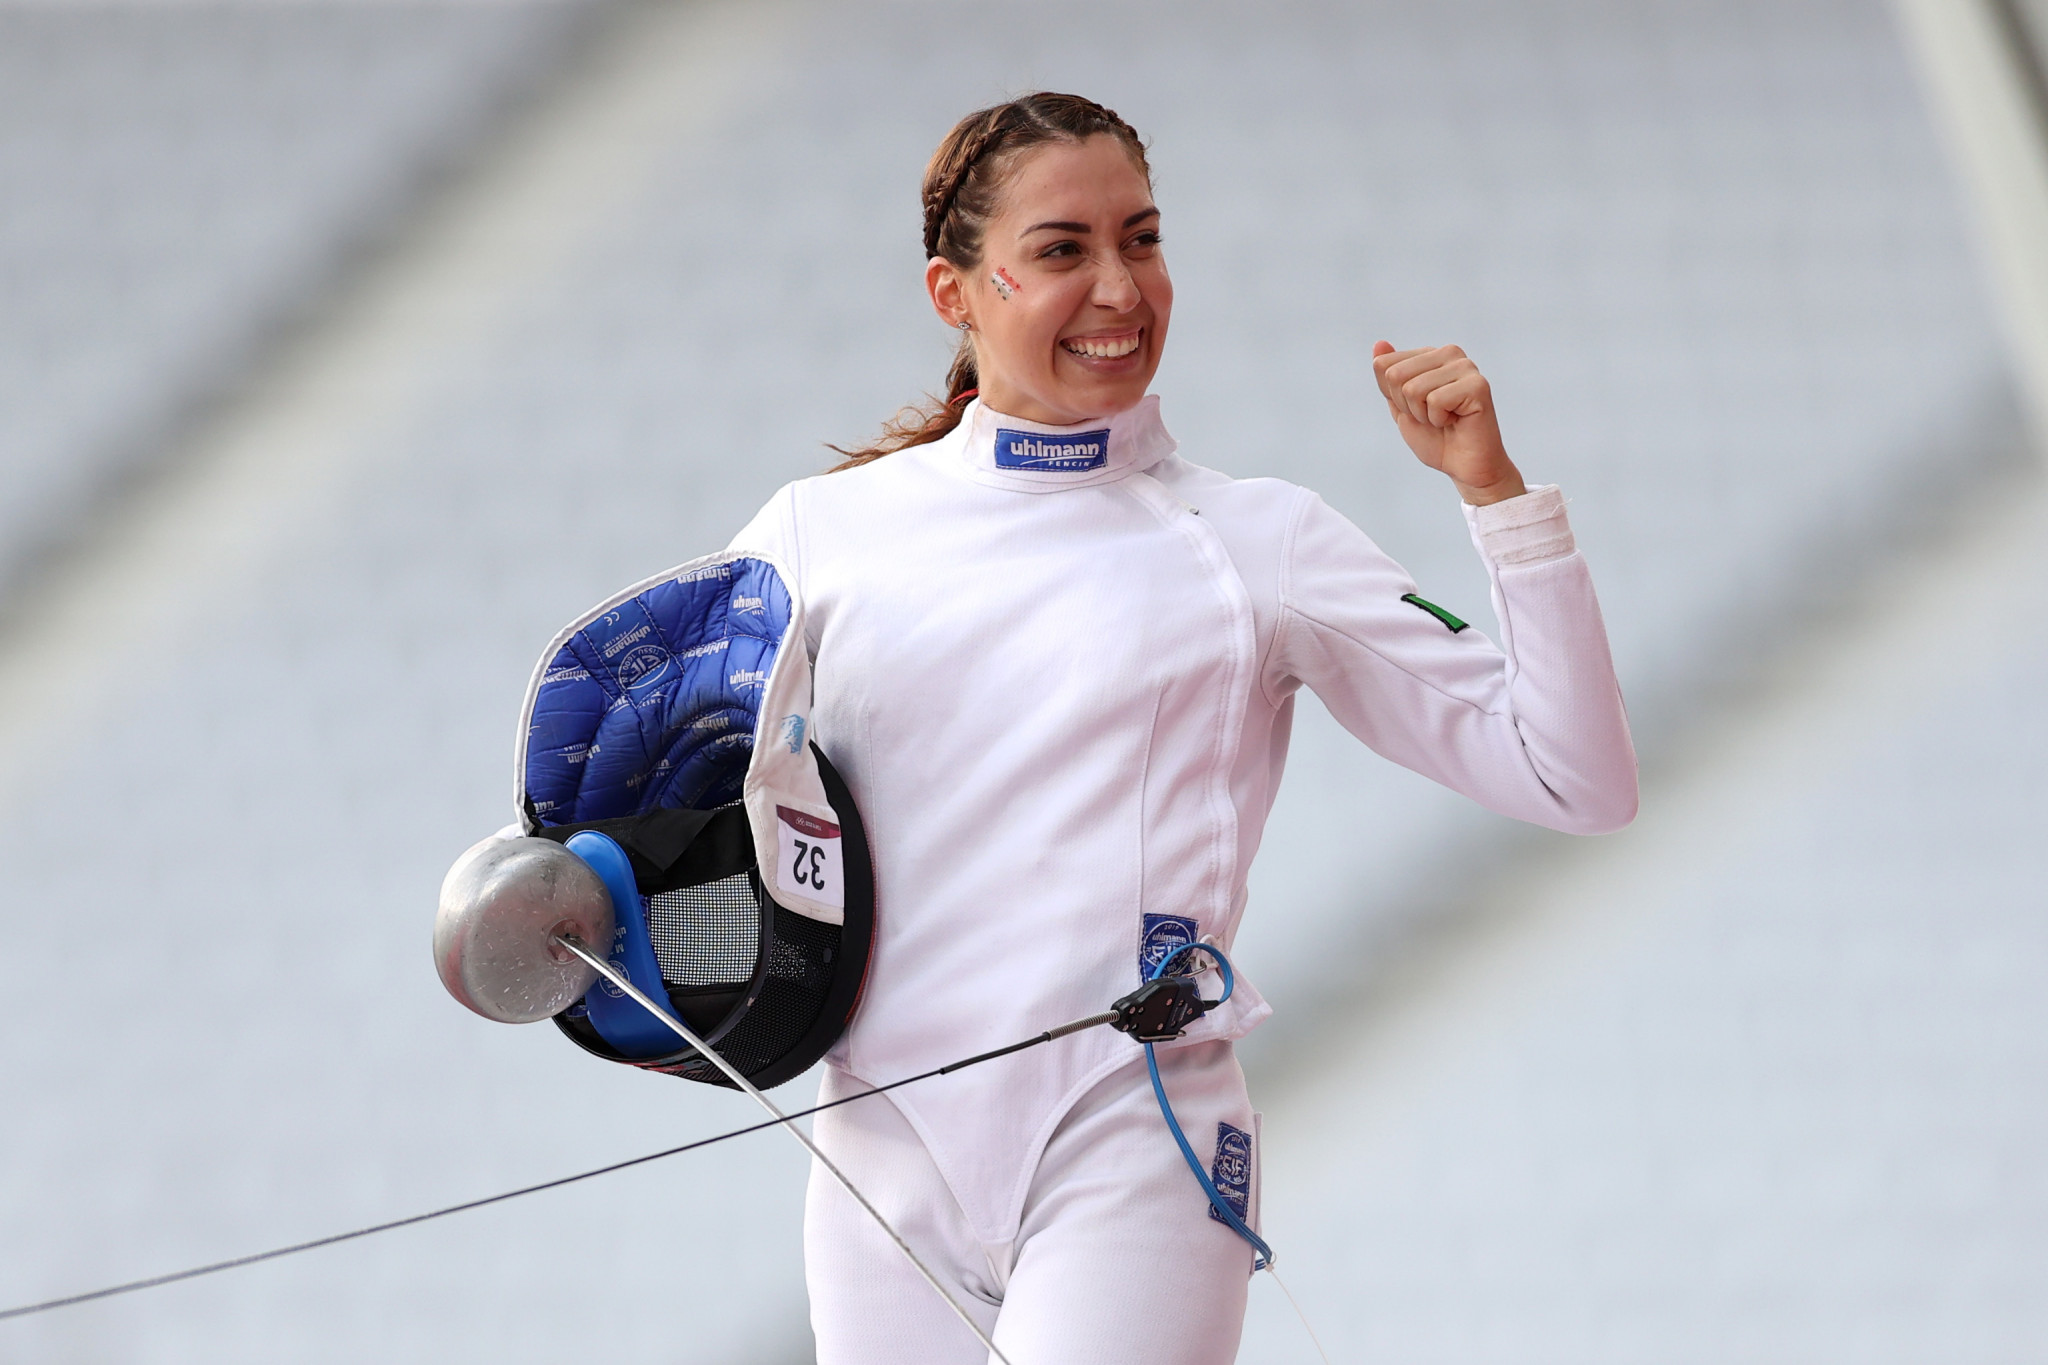 Mexico's Mariana Arceo was the second-best qualifier at the Pentathlon World Cup in Albena ©Getty Images